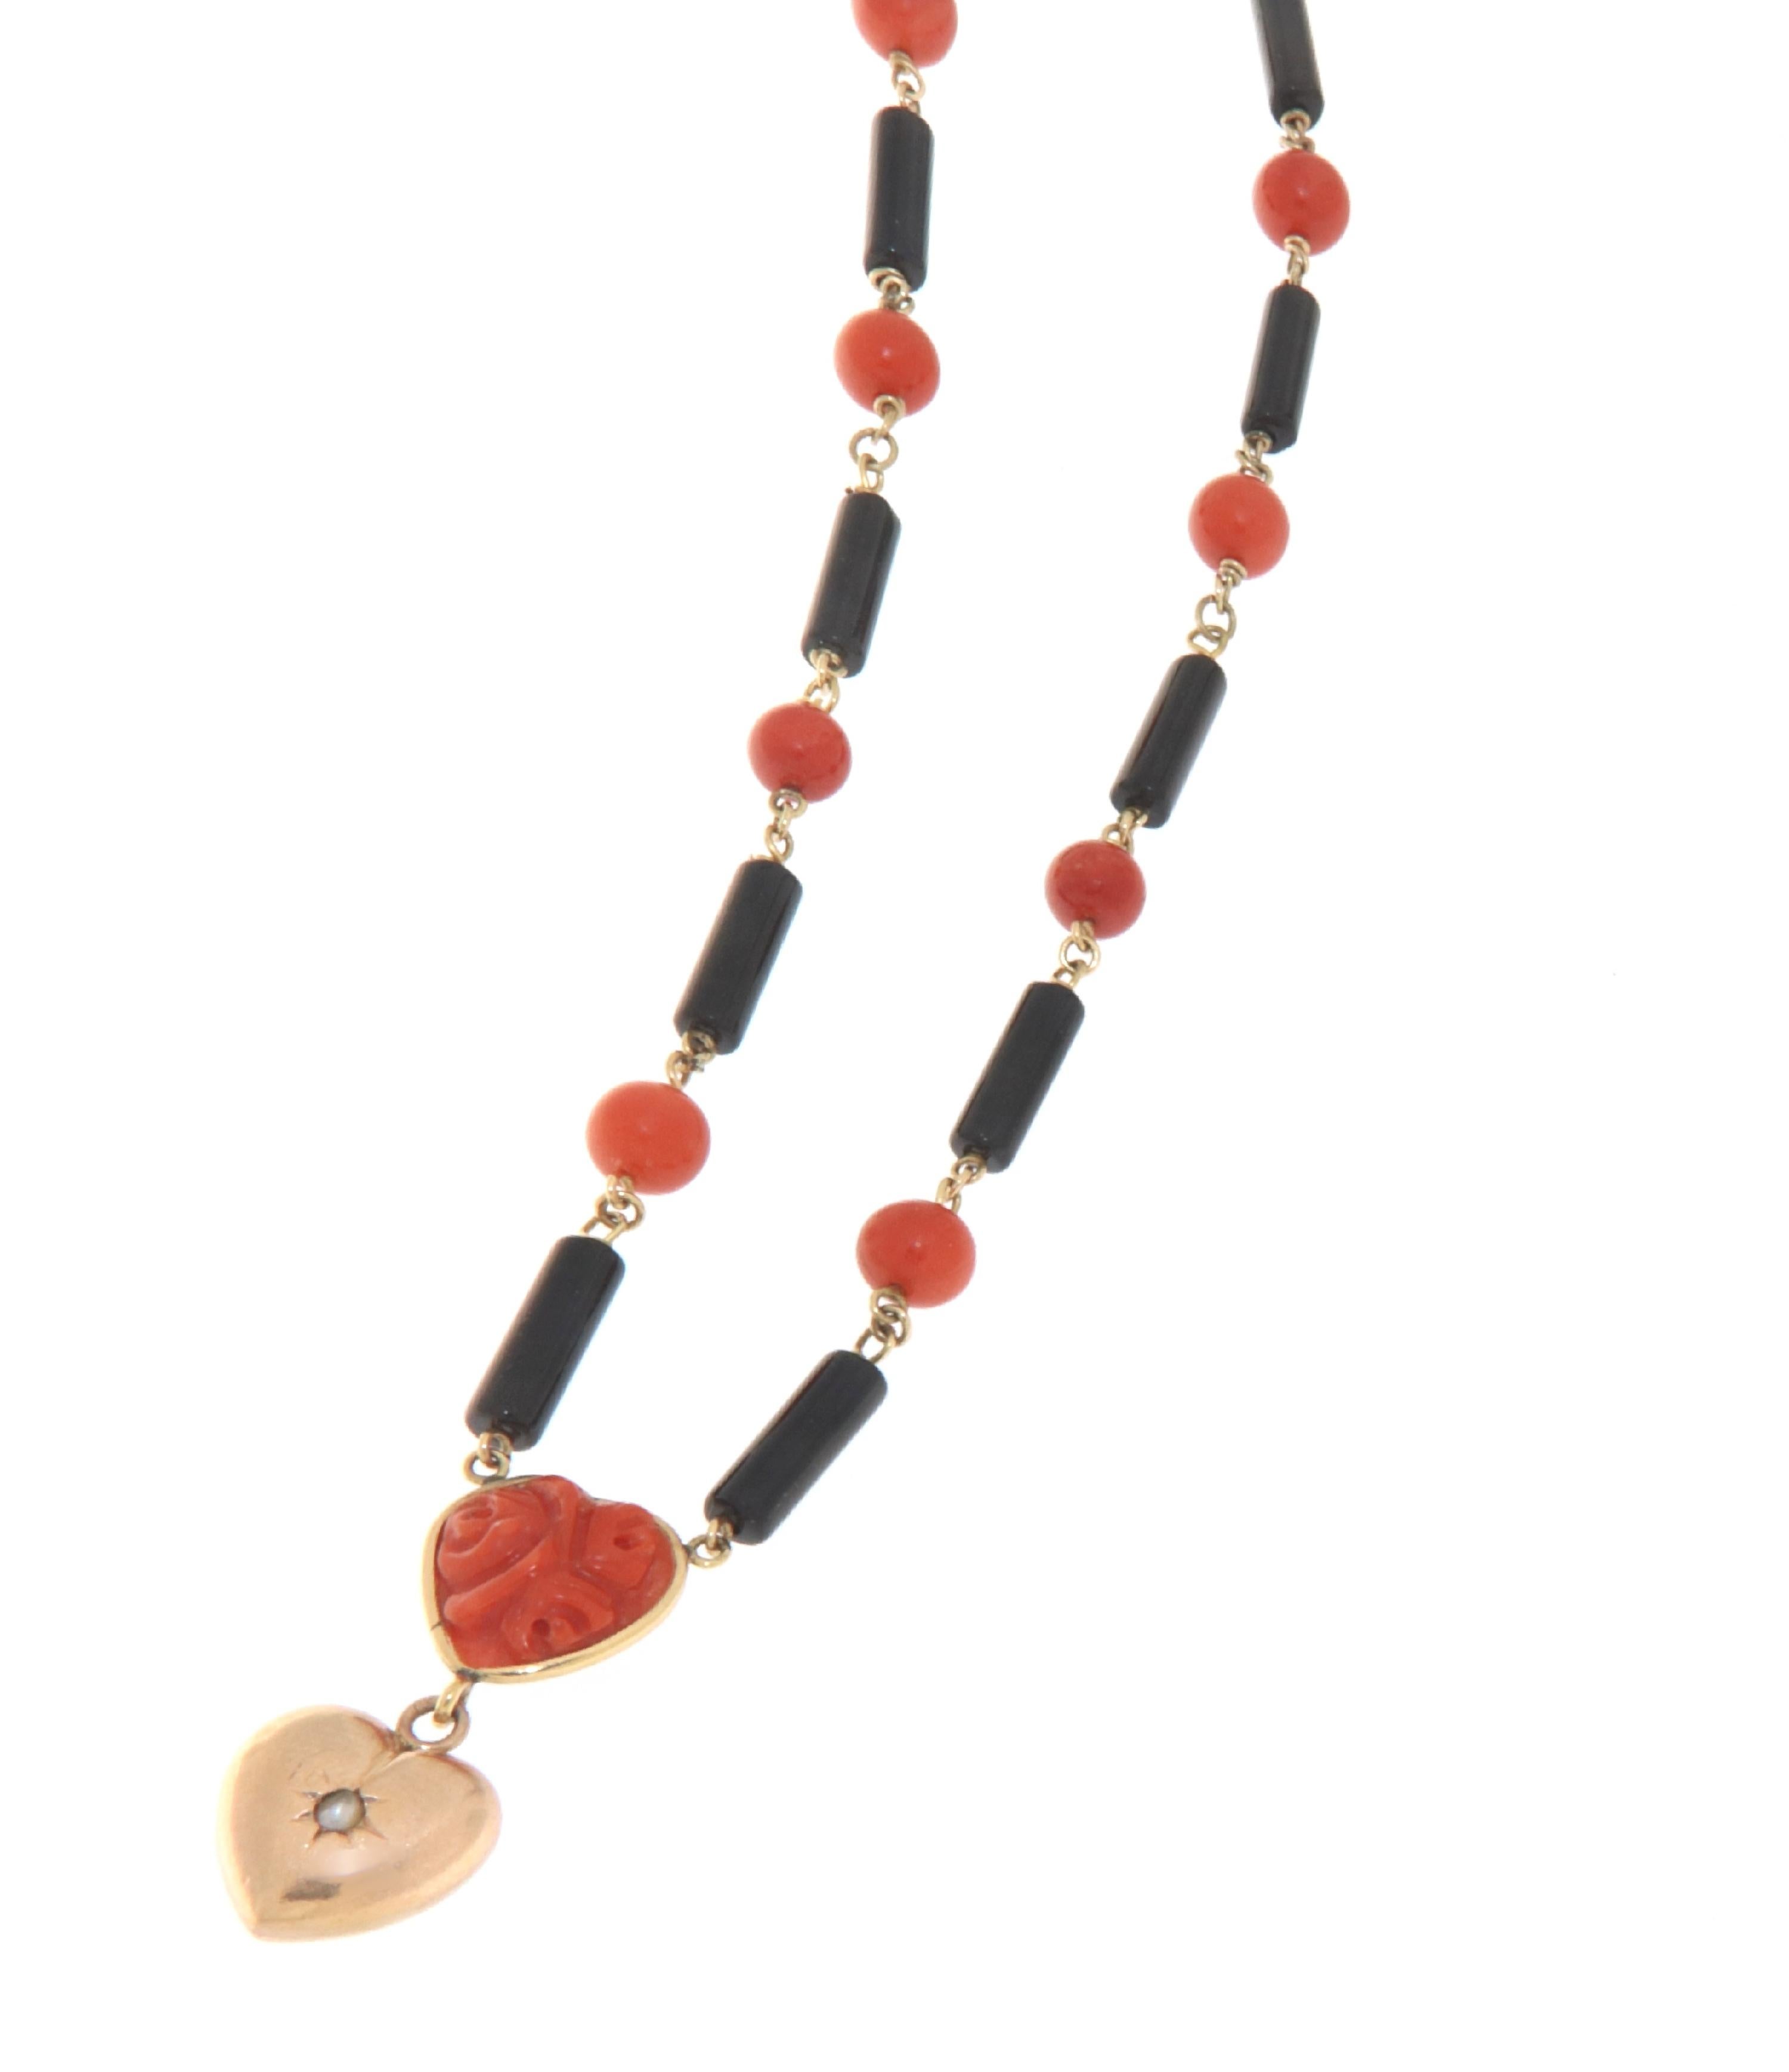 This exquisite necklace in 18-karat yellow gold is a striking assembly of elegance and natural charm. It features a harmonious arrangement of lustrous natural coral beads interspersed with sleek onyx barrels, creating a sophisticated contrast of